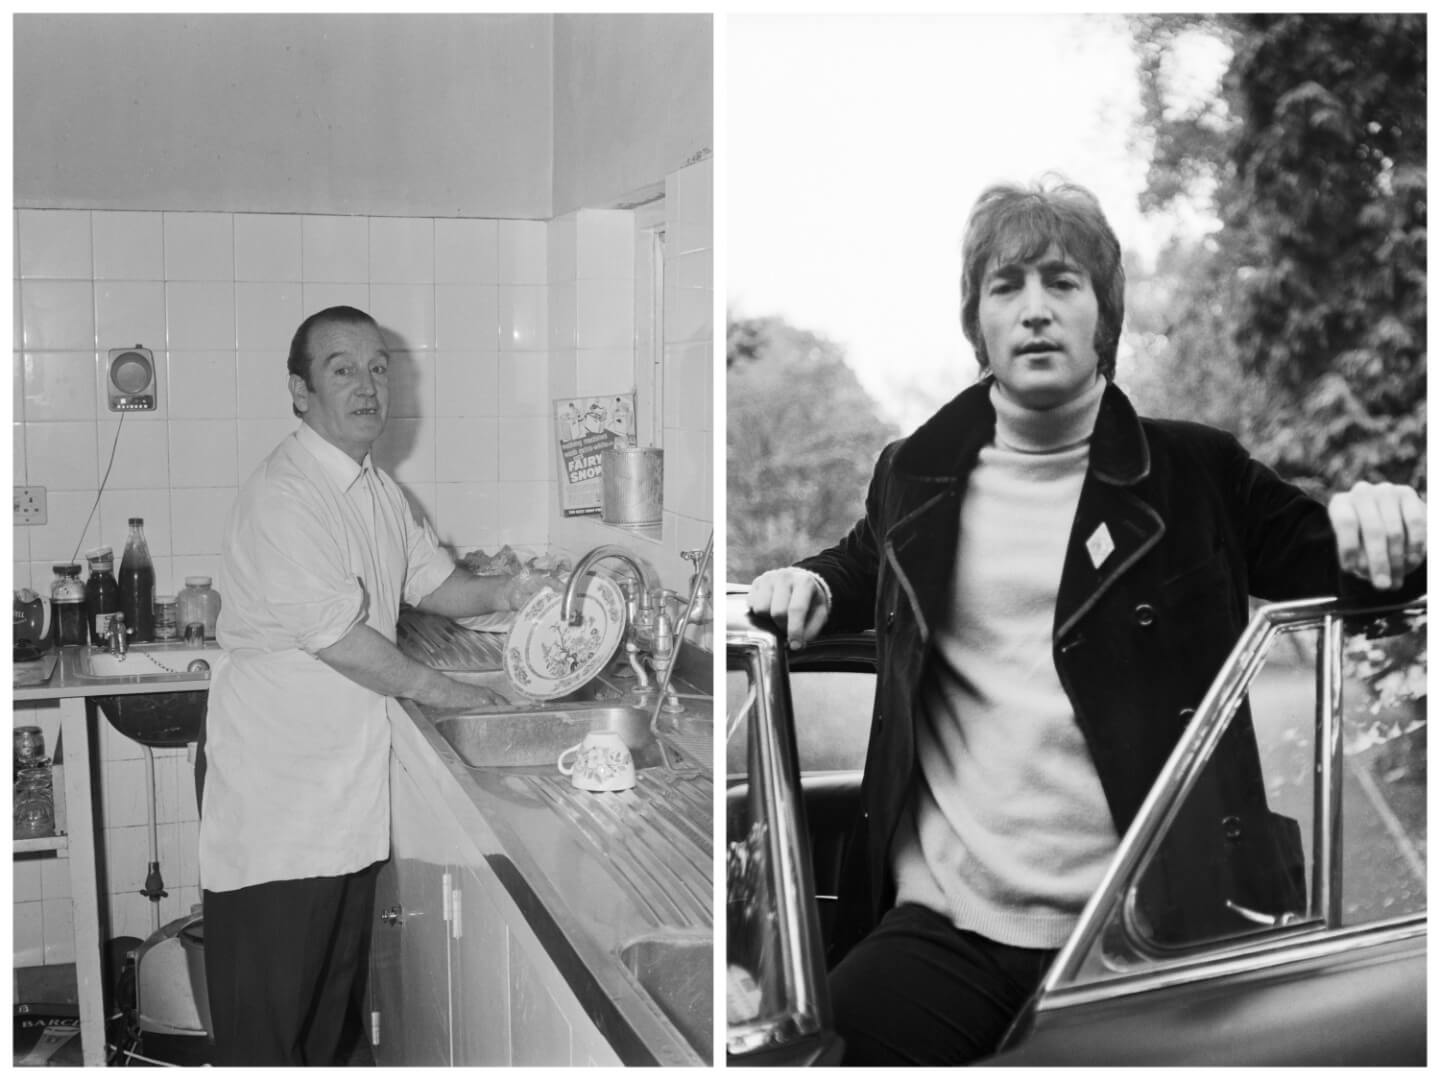 John Lennon's dad Alfred Lennon washes dishes at the sink. John Lennon stands behind an open car door.